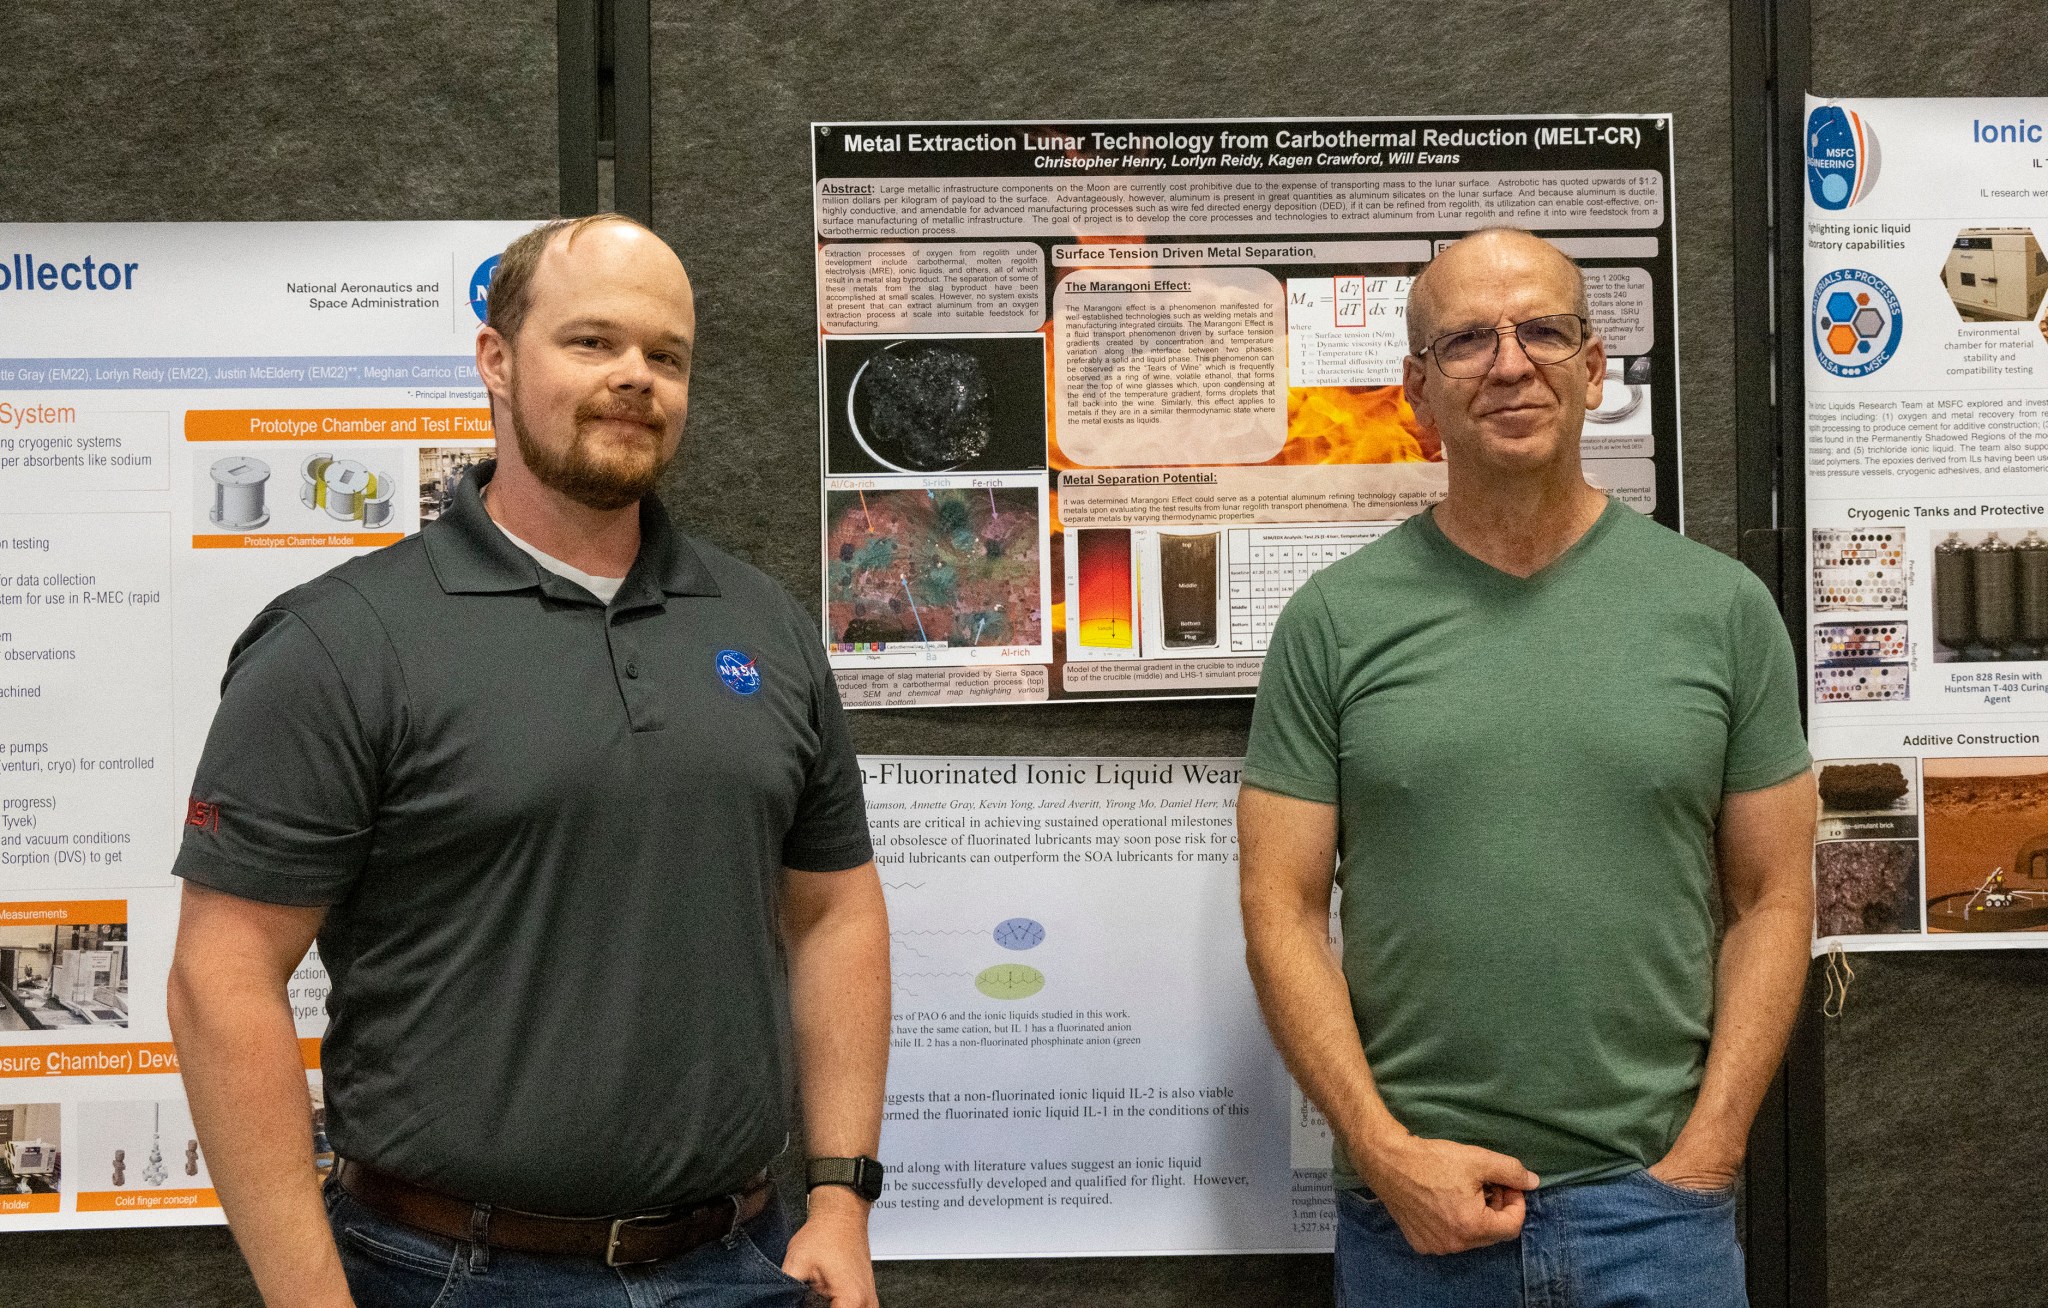 Kagen Crawford, left, building manager and controls engineer for the Environmental Control and Life Support System with Jesus Dominguez, a subject matter expert, on their study, “Metal Extraction Lunar Technology from Carbothermal Production (MELT-CR).”